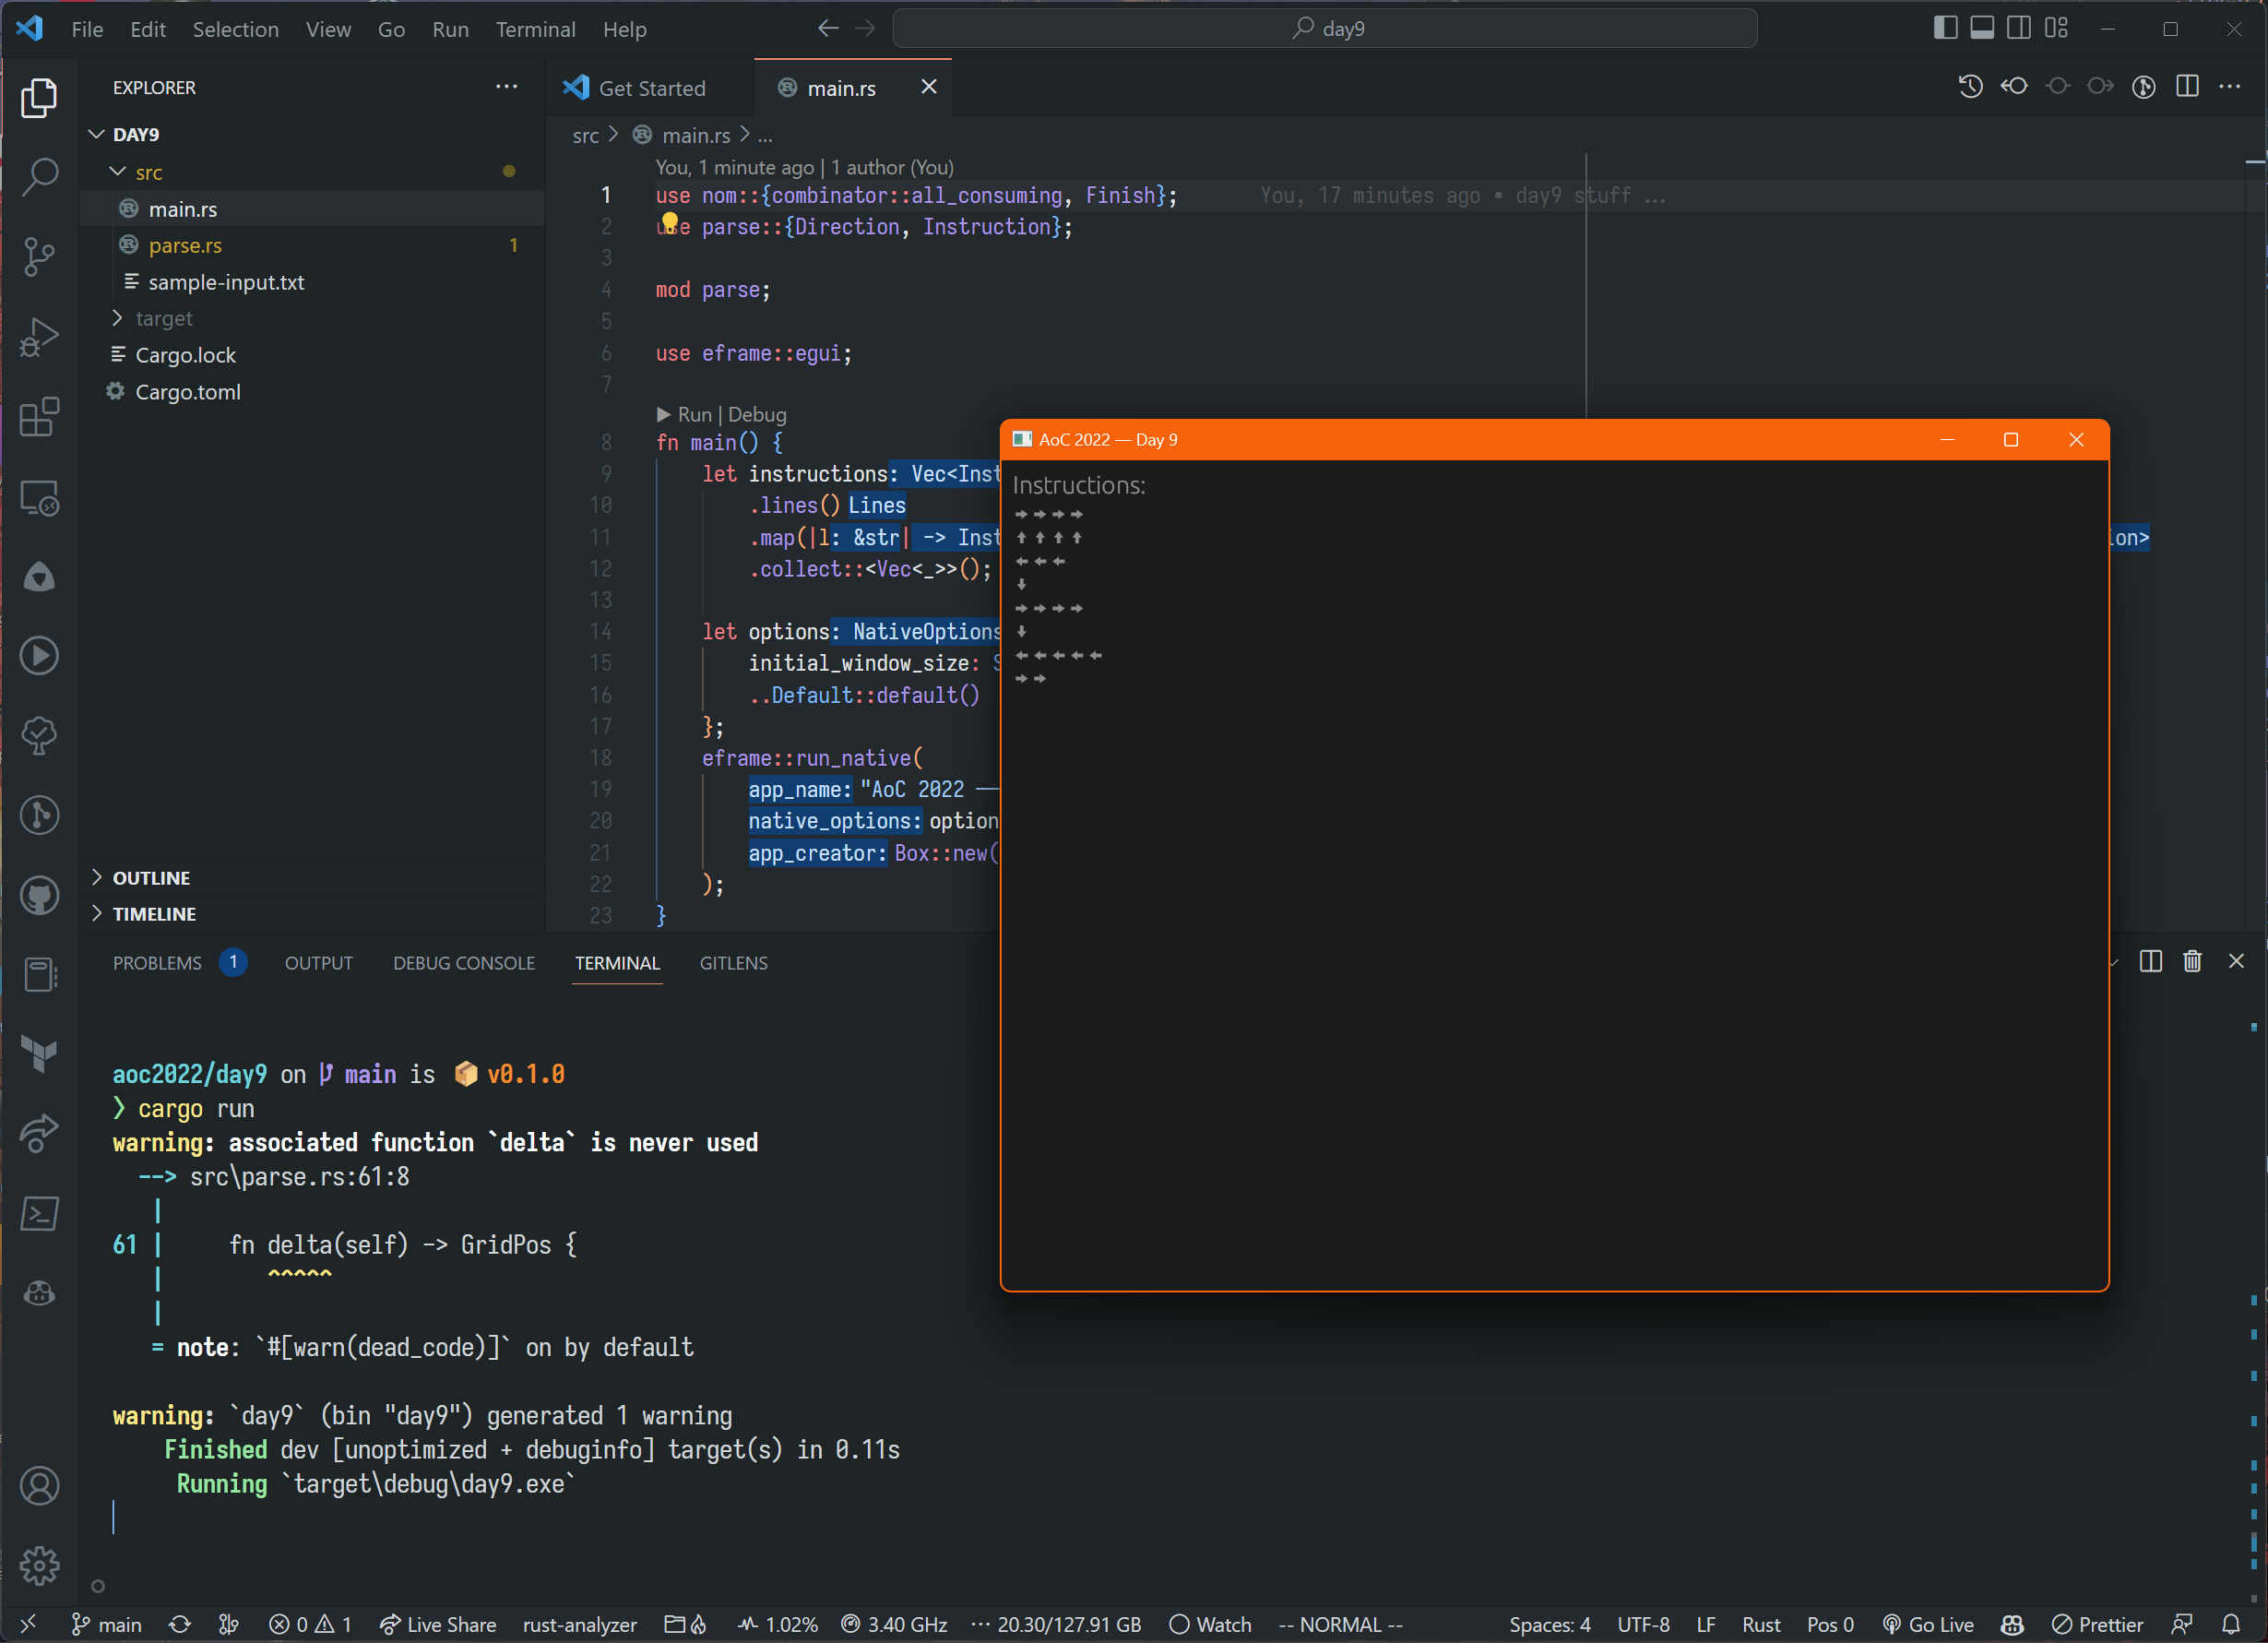 Screnshot showing VS Code with the code we mentioned, and an eframe/egui window showing an Instructions header, and some arrows as the instructions